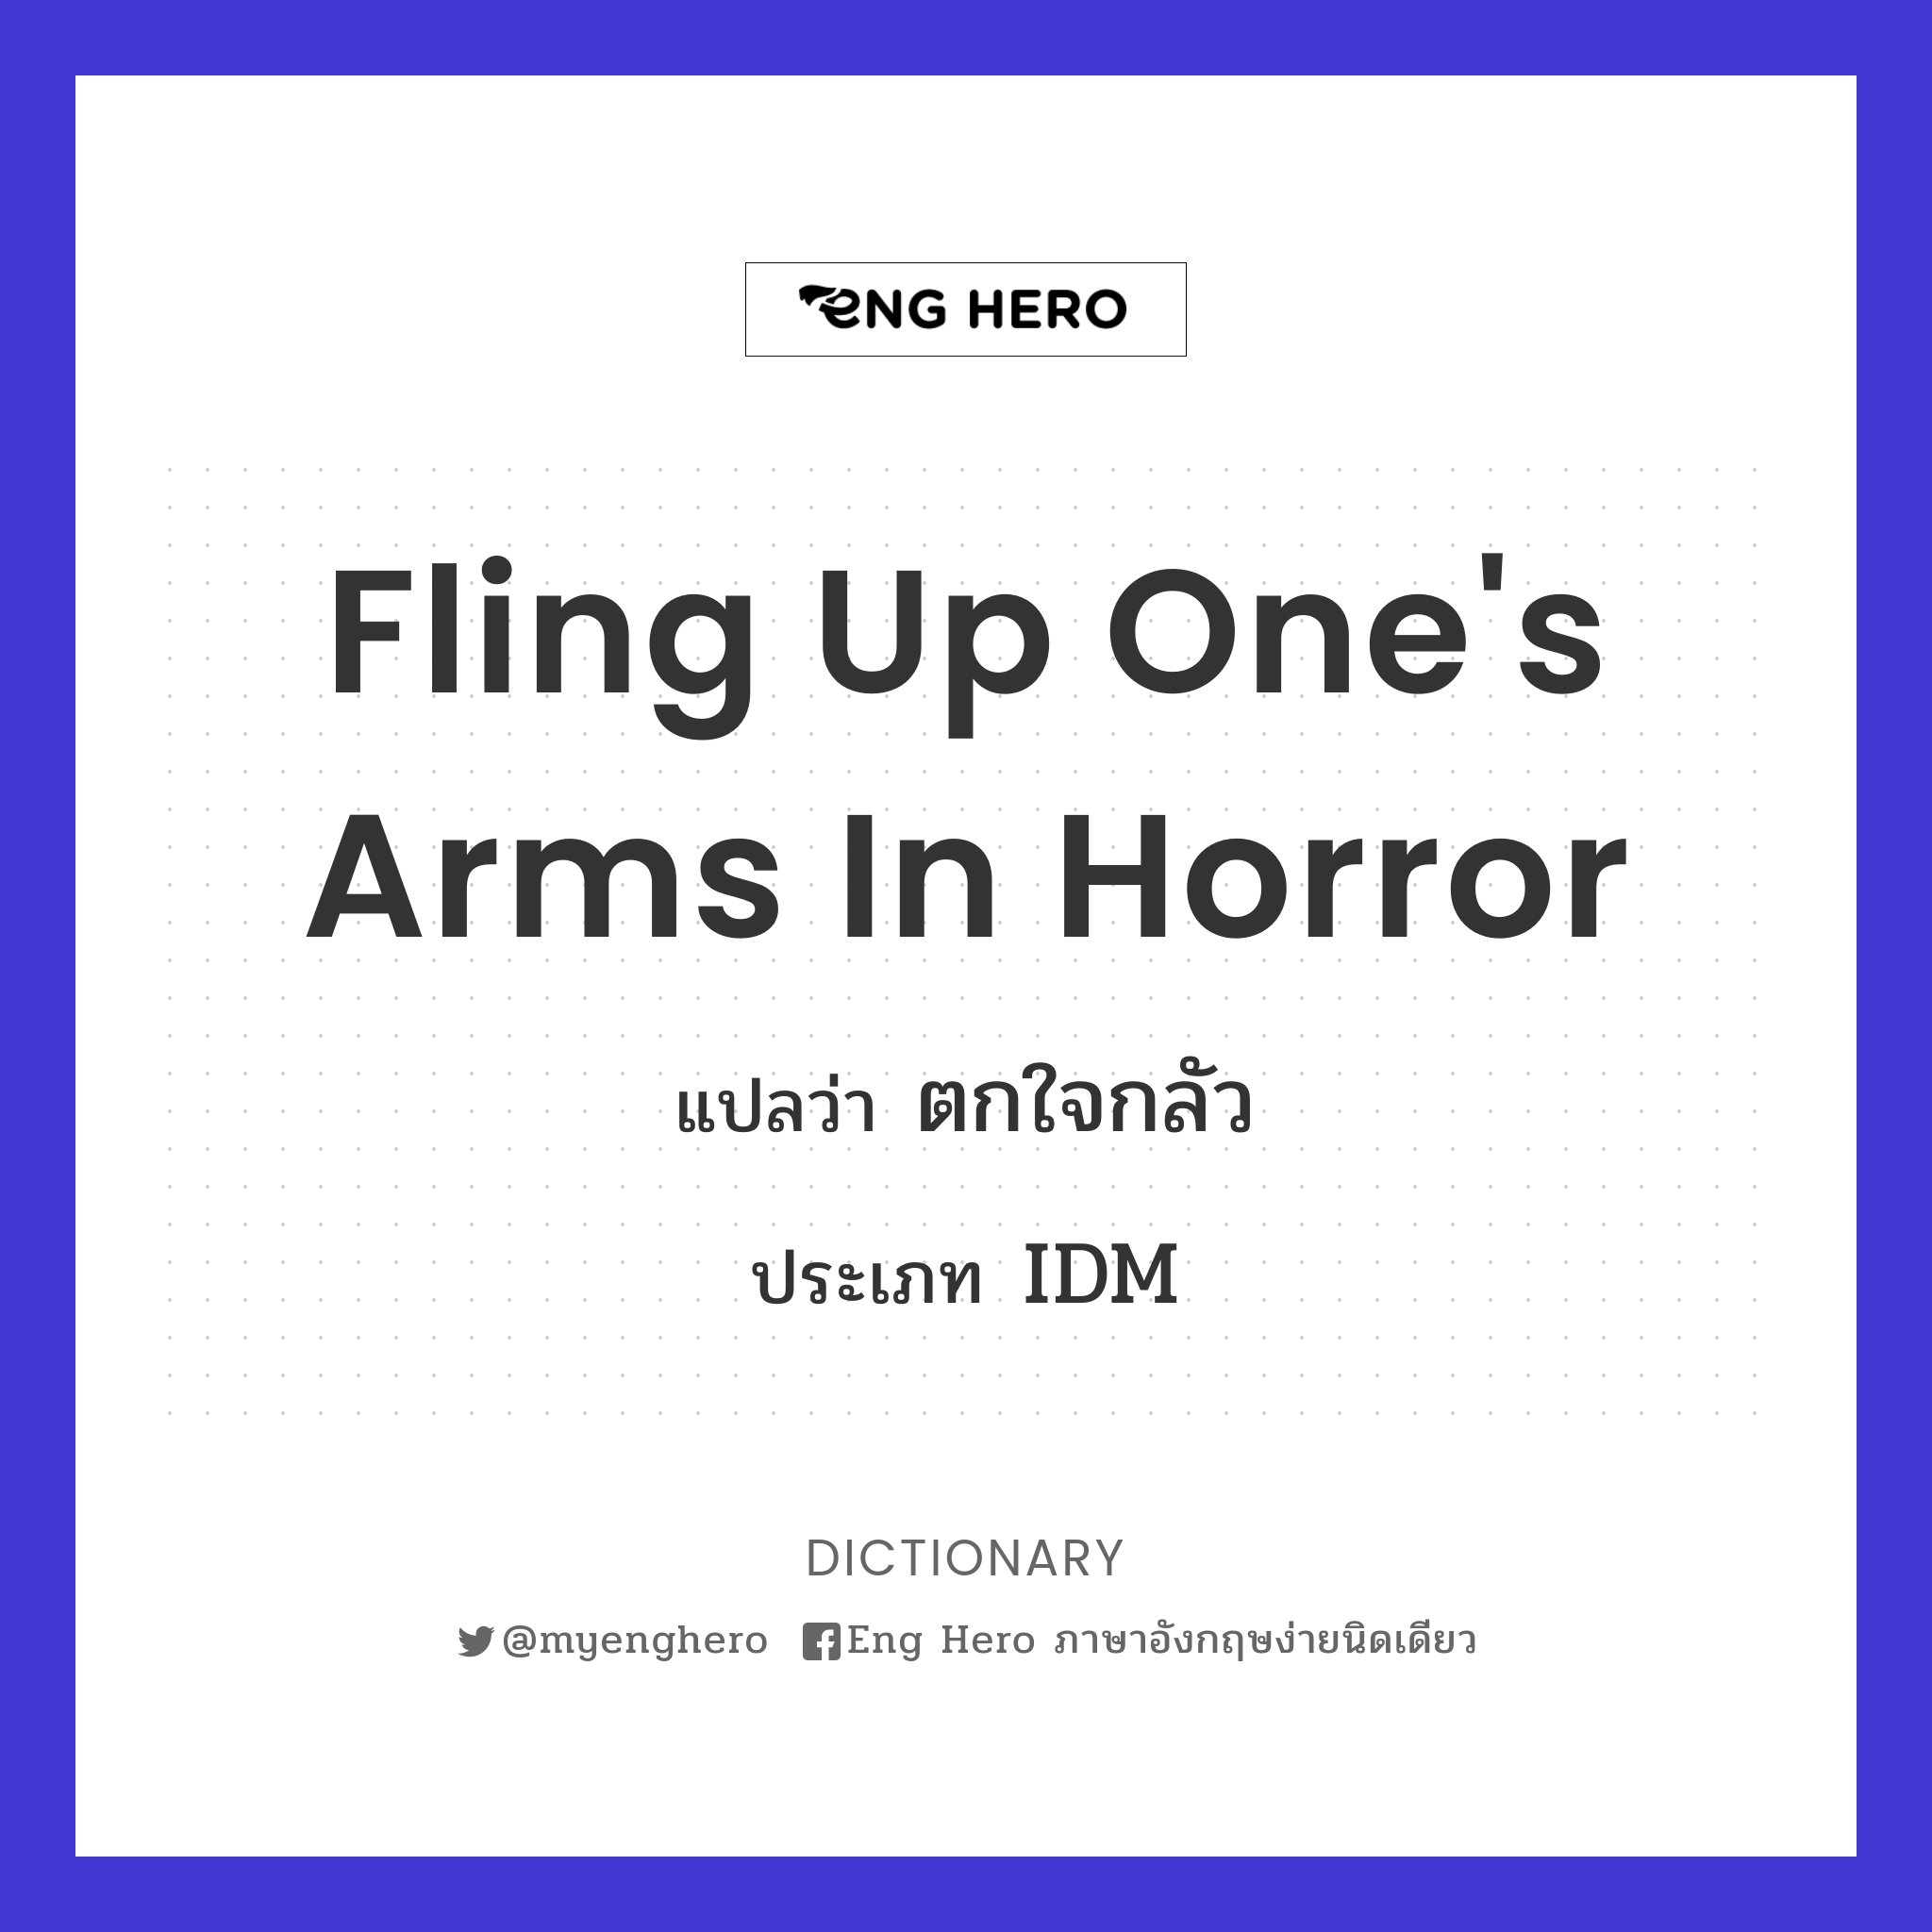 fling up one's arms in horror